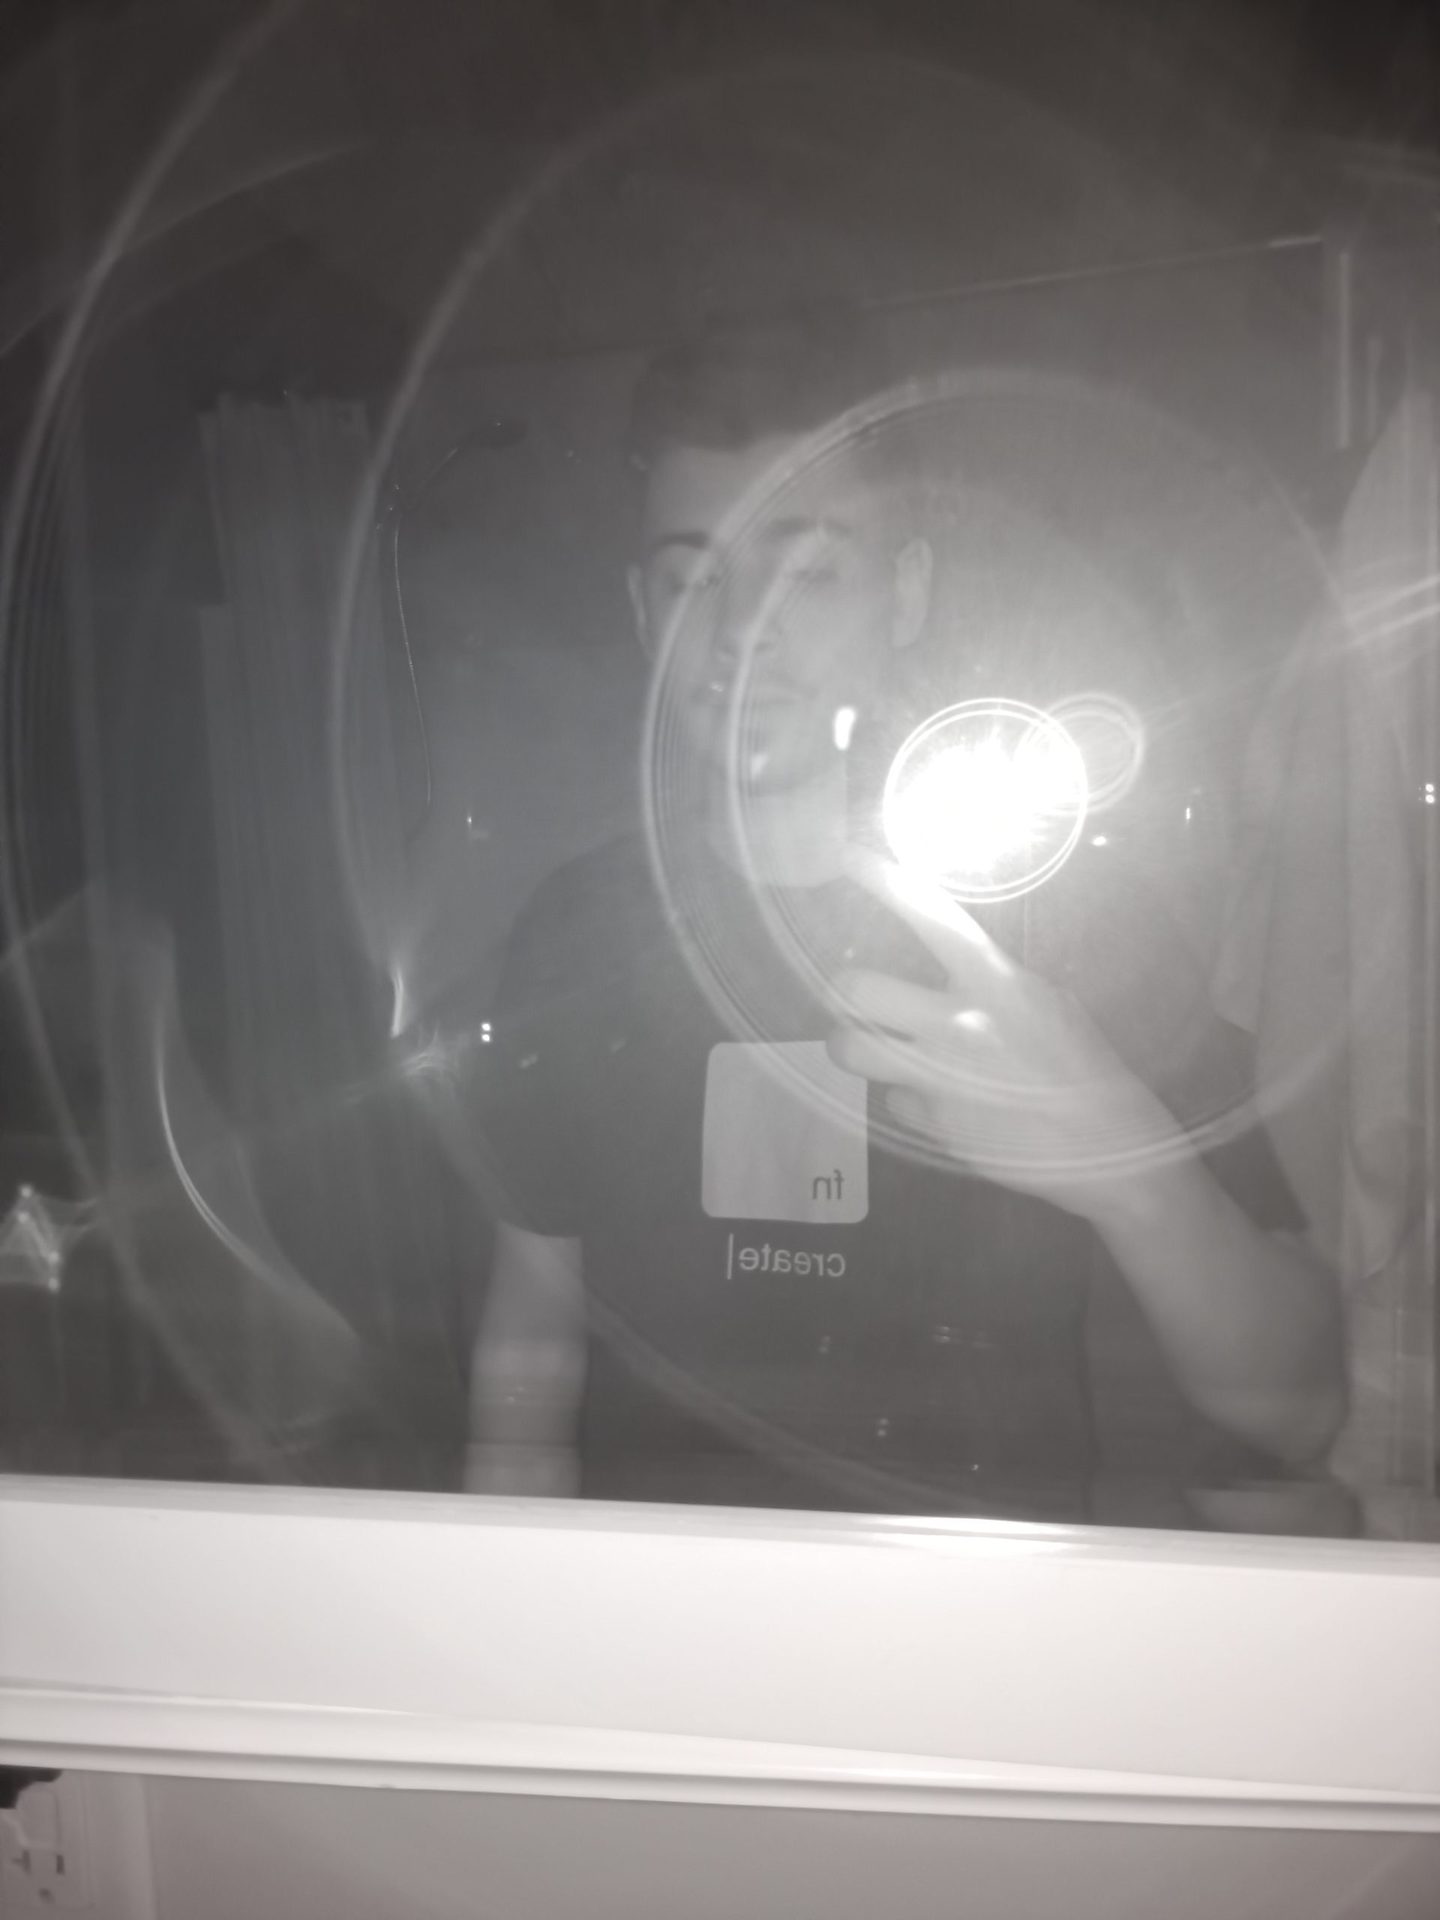 Ulefone Armor 11 5G Night Vision Camera Sample showing a picture of a man in a dark colored tshirt taking a photo in a mirror, with the flash reflecting.